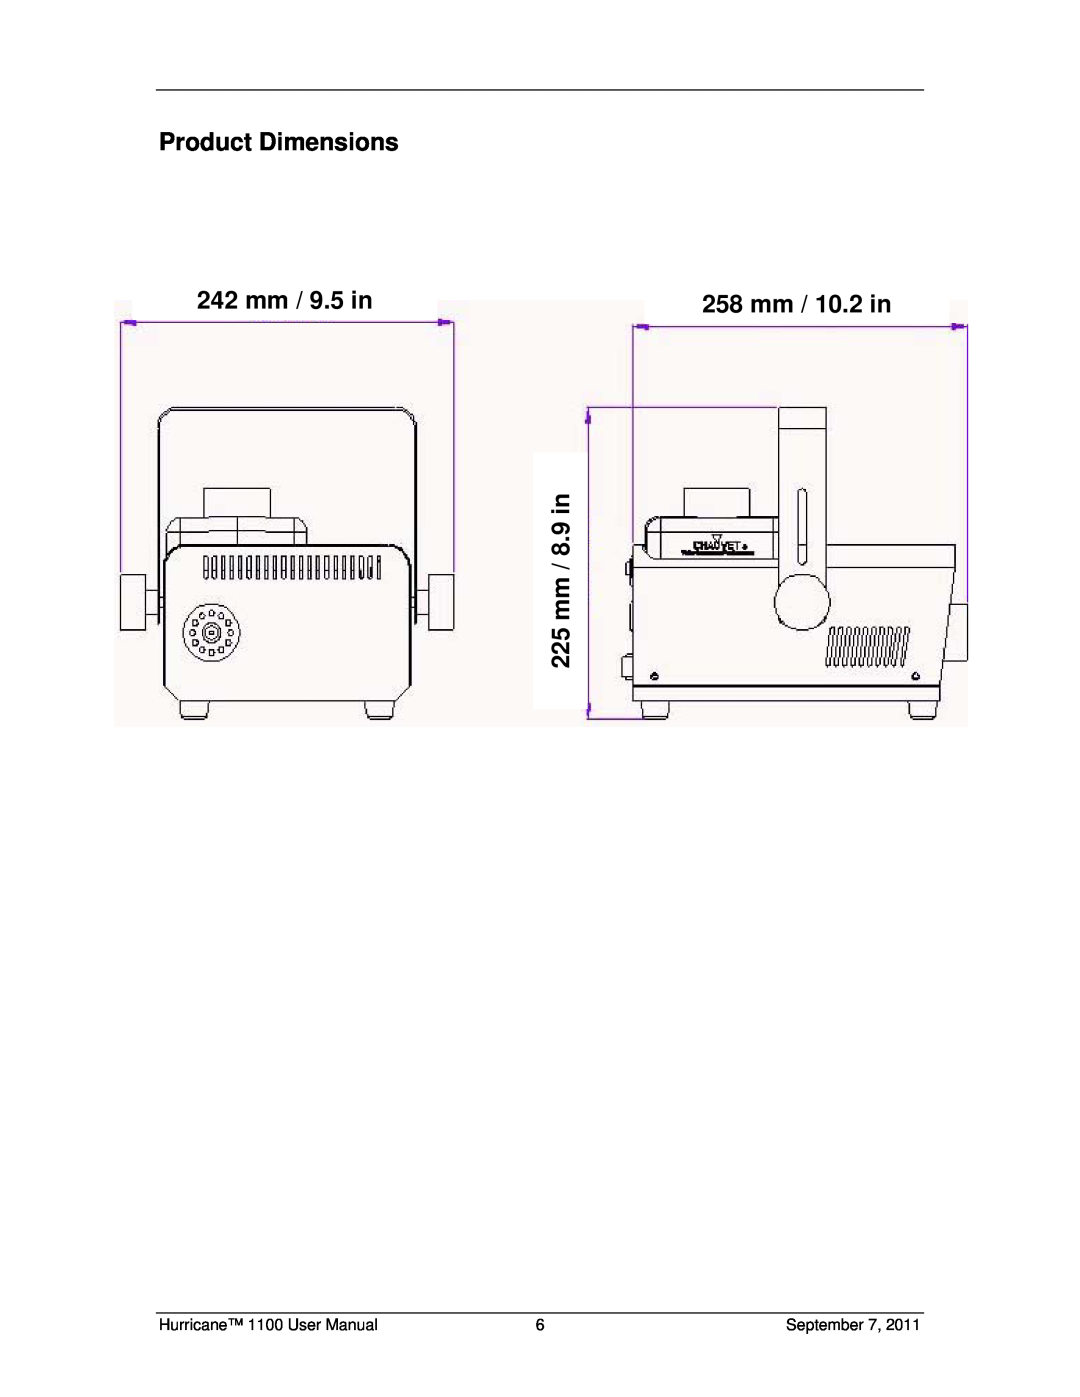 Chauvet 1100 user manual Product Dimensions, 242 mm / 9.5 in, 258 mm / 10.2 in, 225 mm / 8.9 in, September 